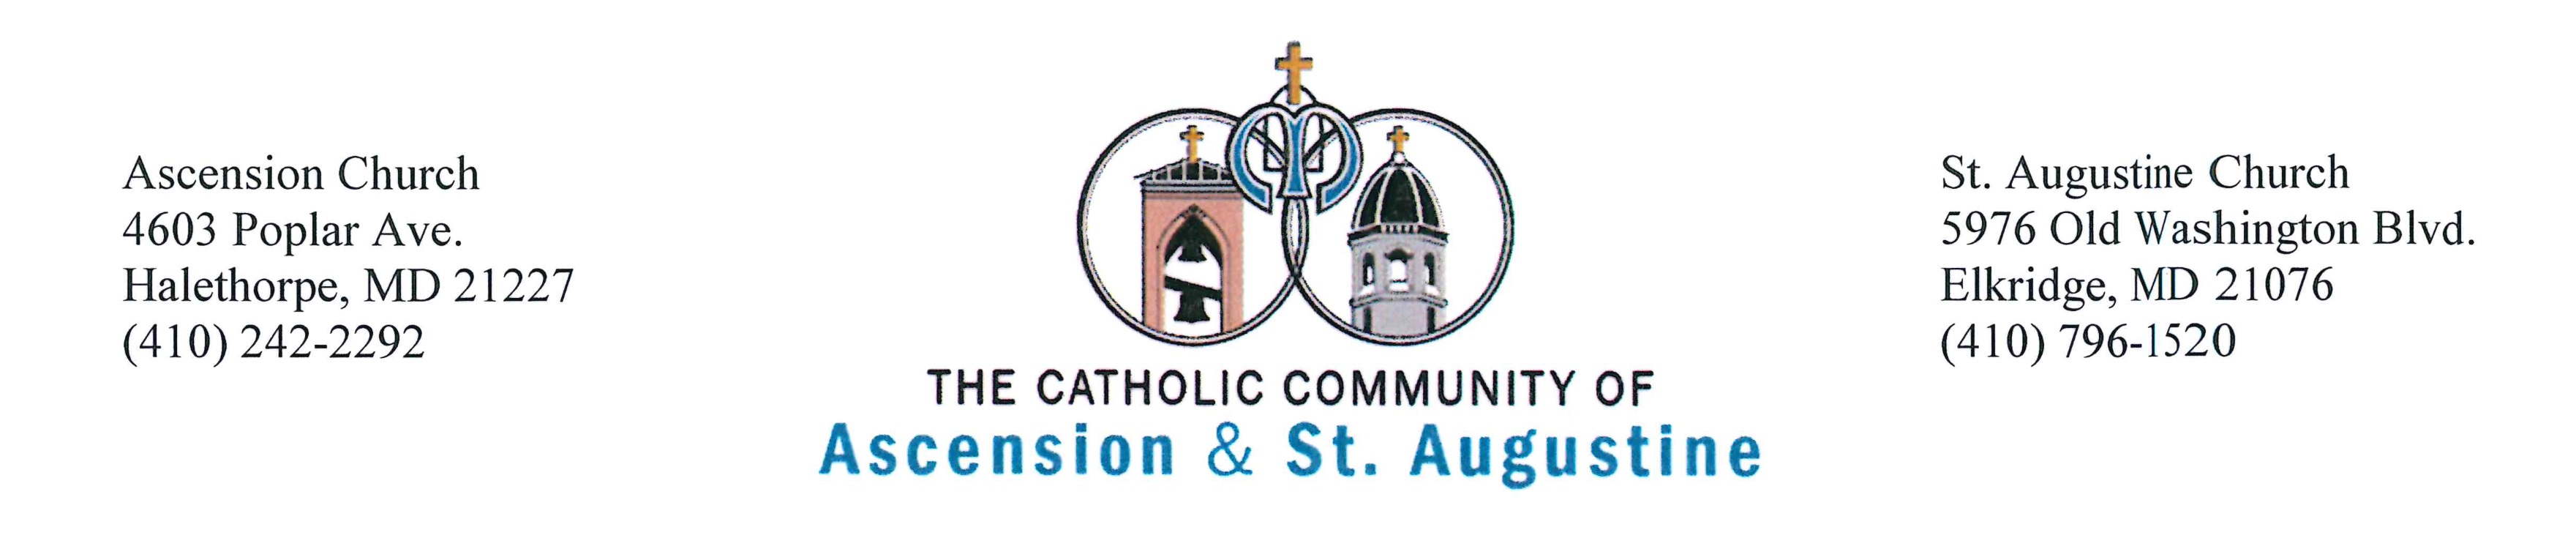 Catholic Community of Ascension and St. Augustine logo